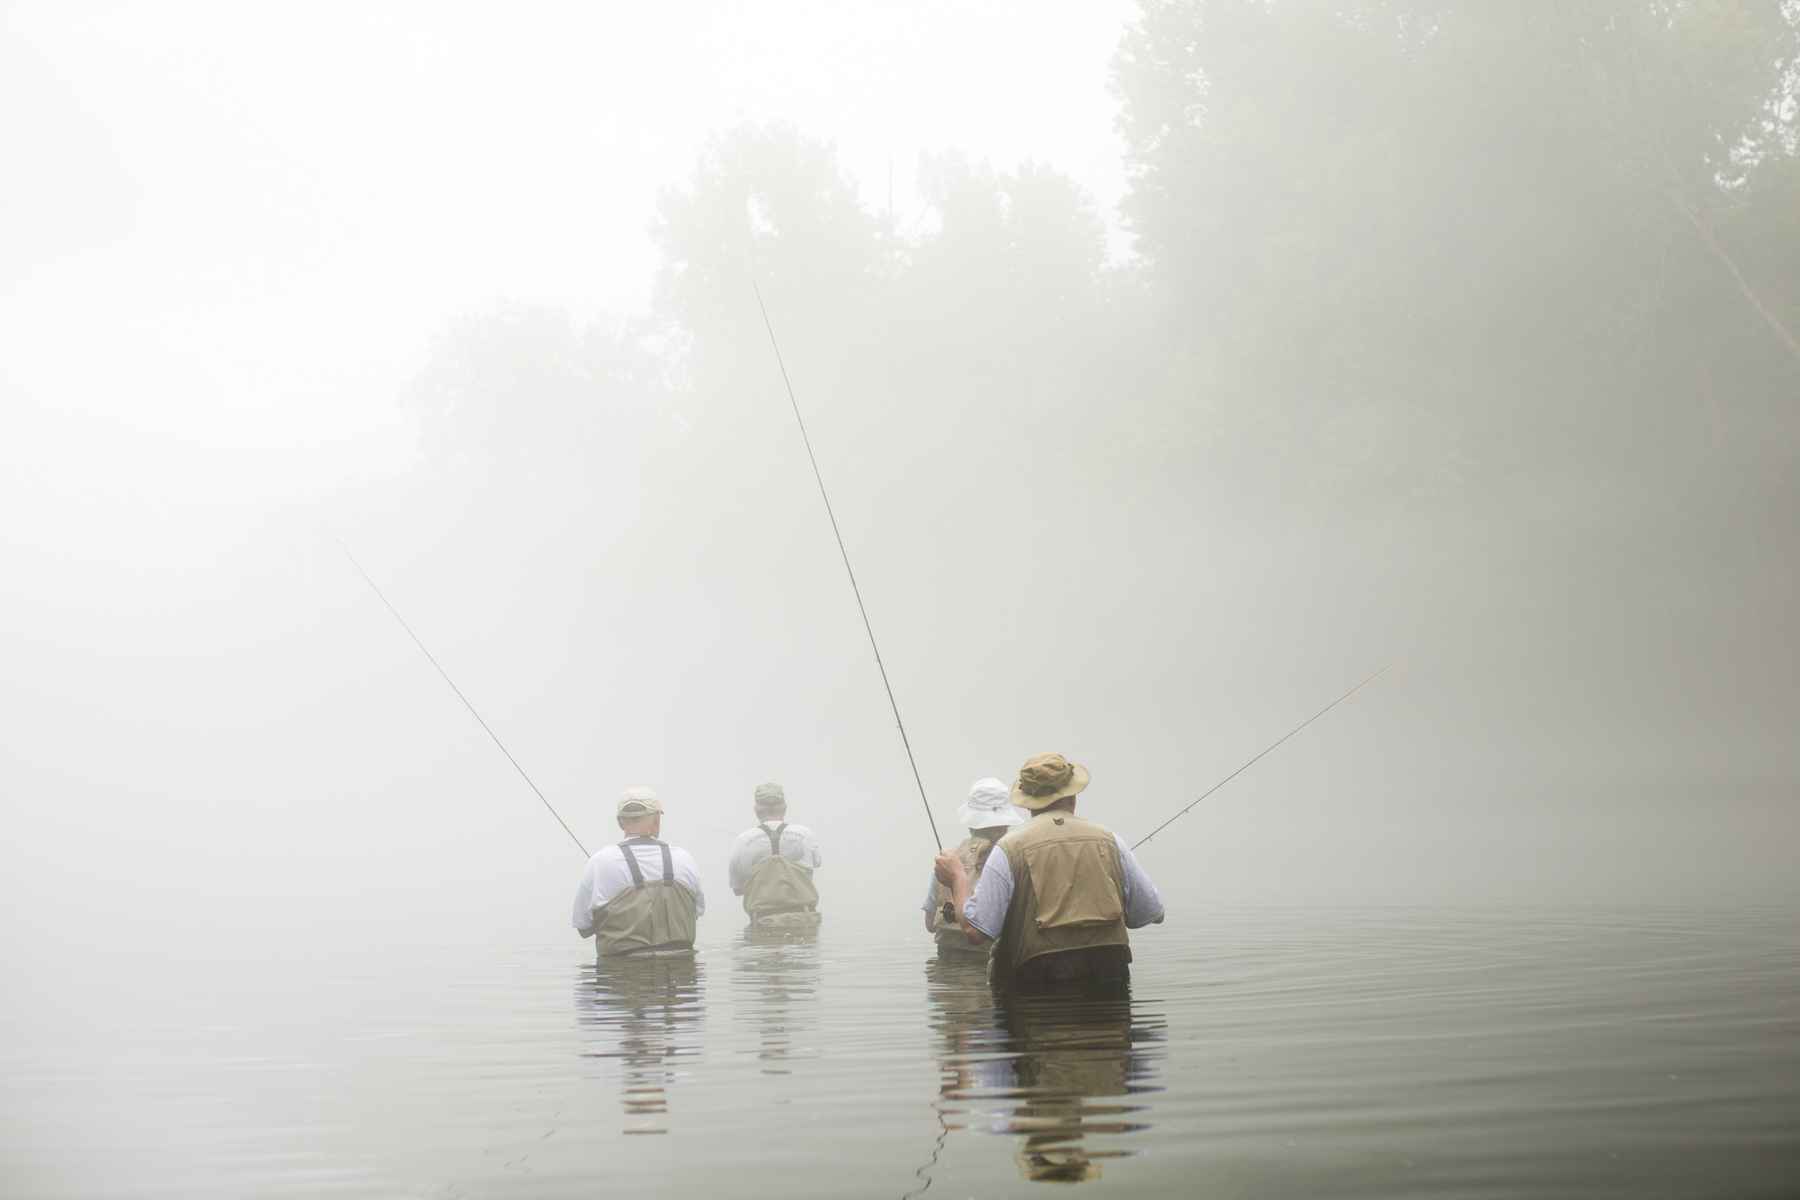 Fishing crowded rivers and streams